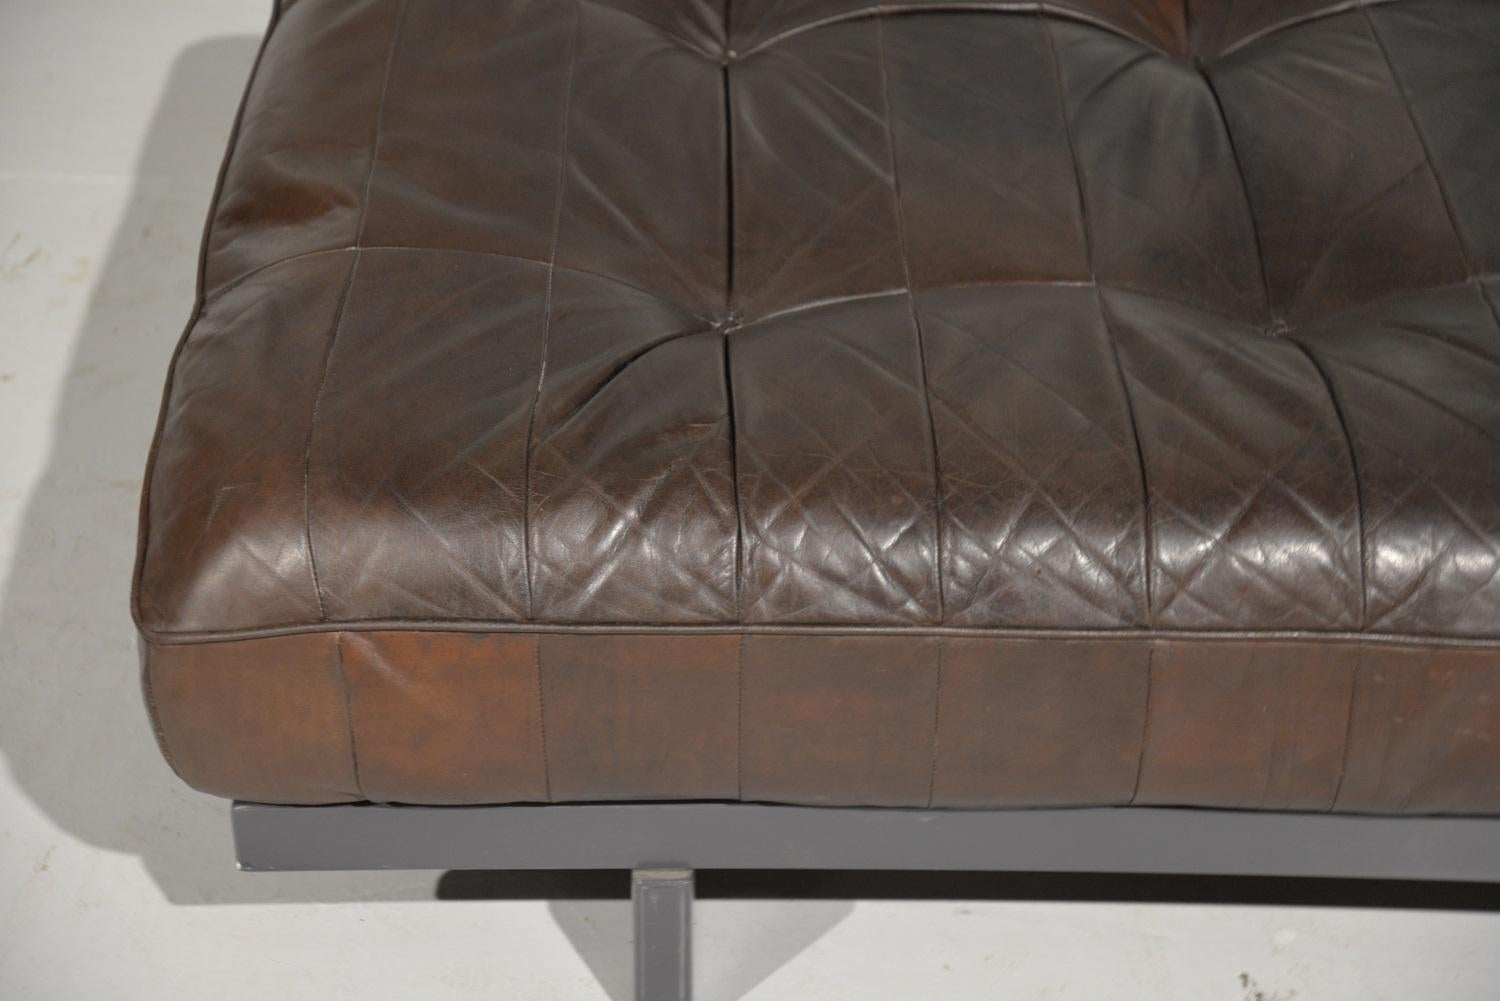 Vintage De Sede DS 80 Patchwork Leather Daybed, Switzerland, 1960s For Sale 1